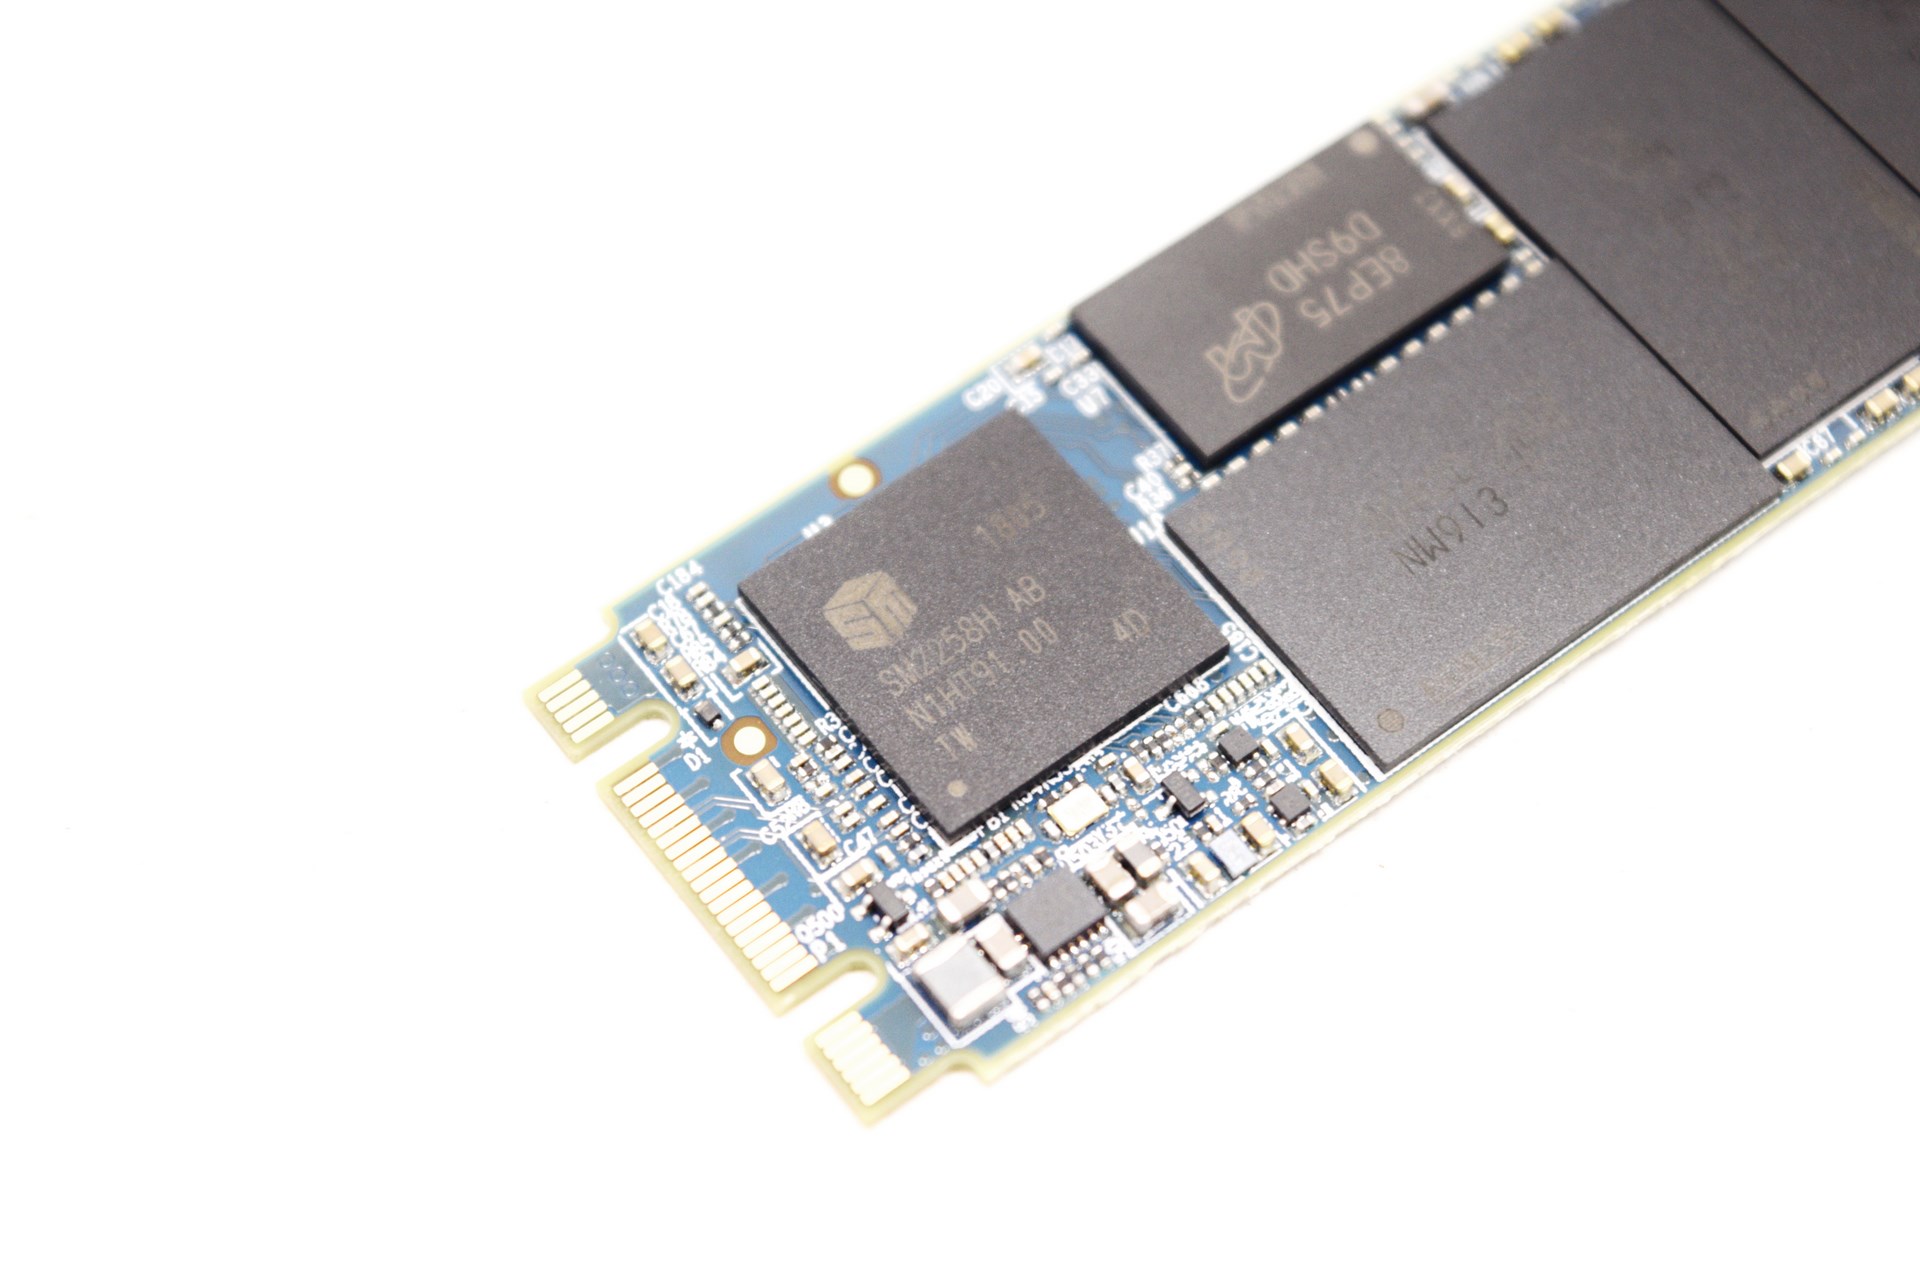 Crucial MX500 500GB M.2 SSD Review